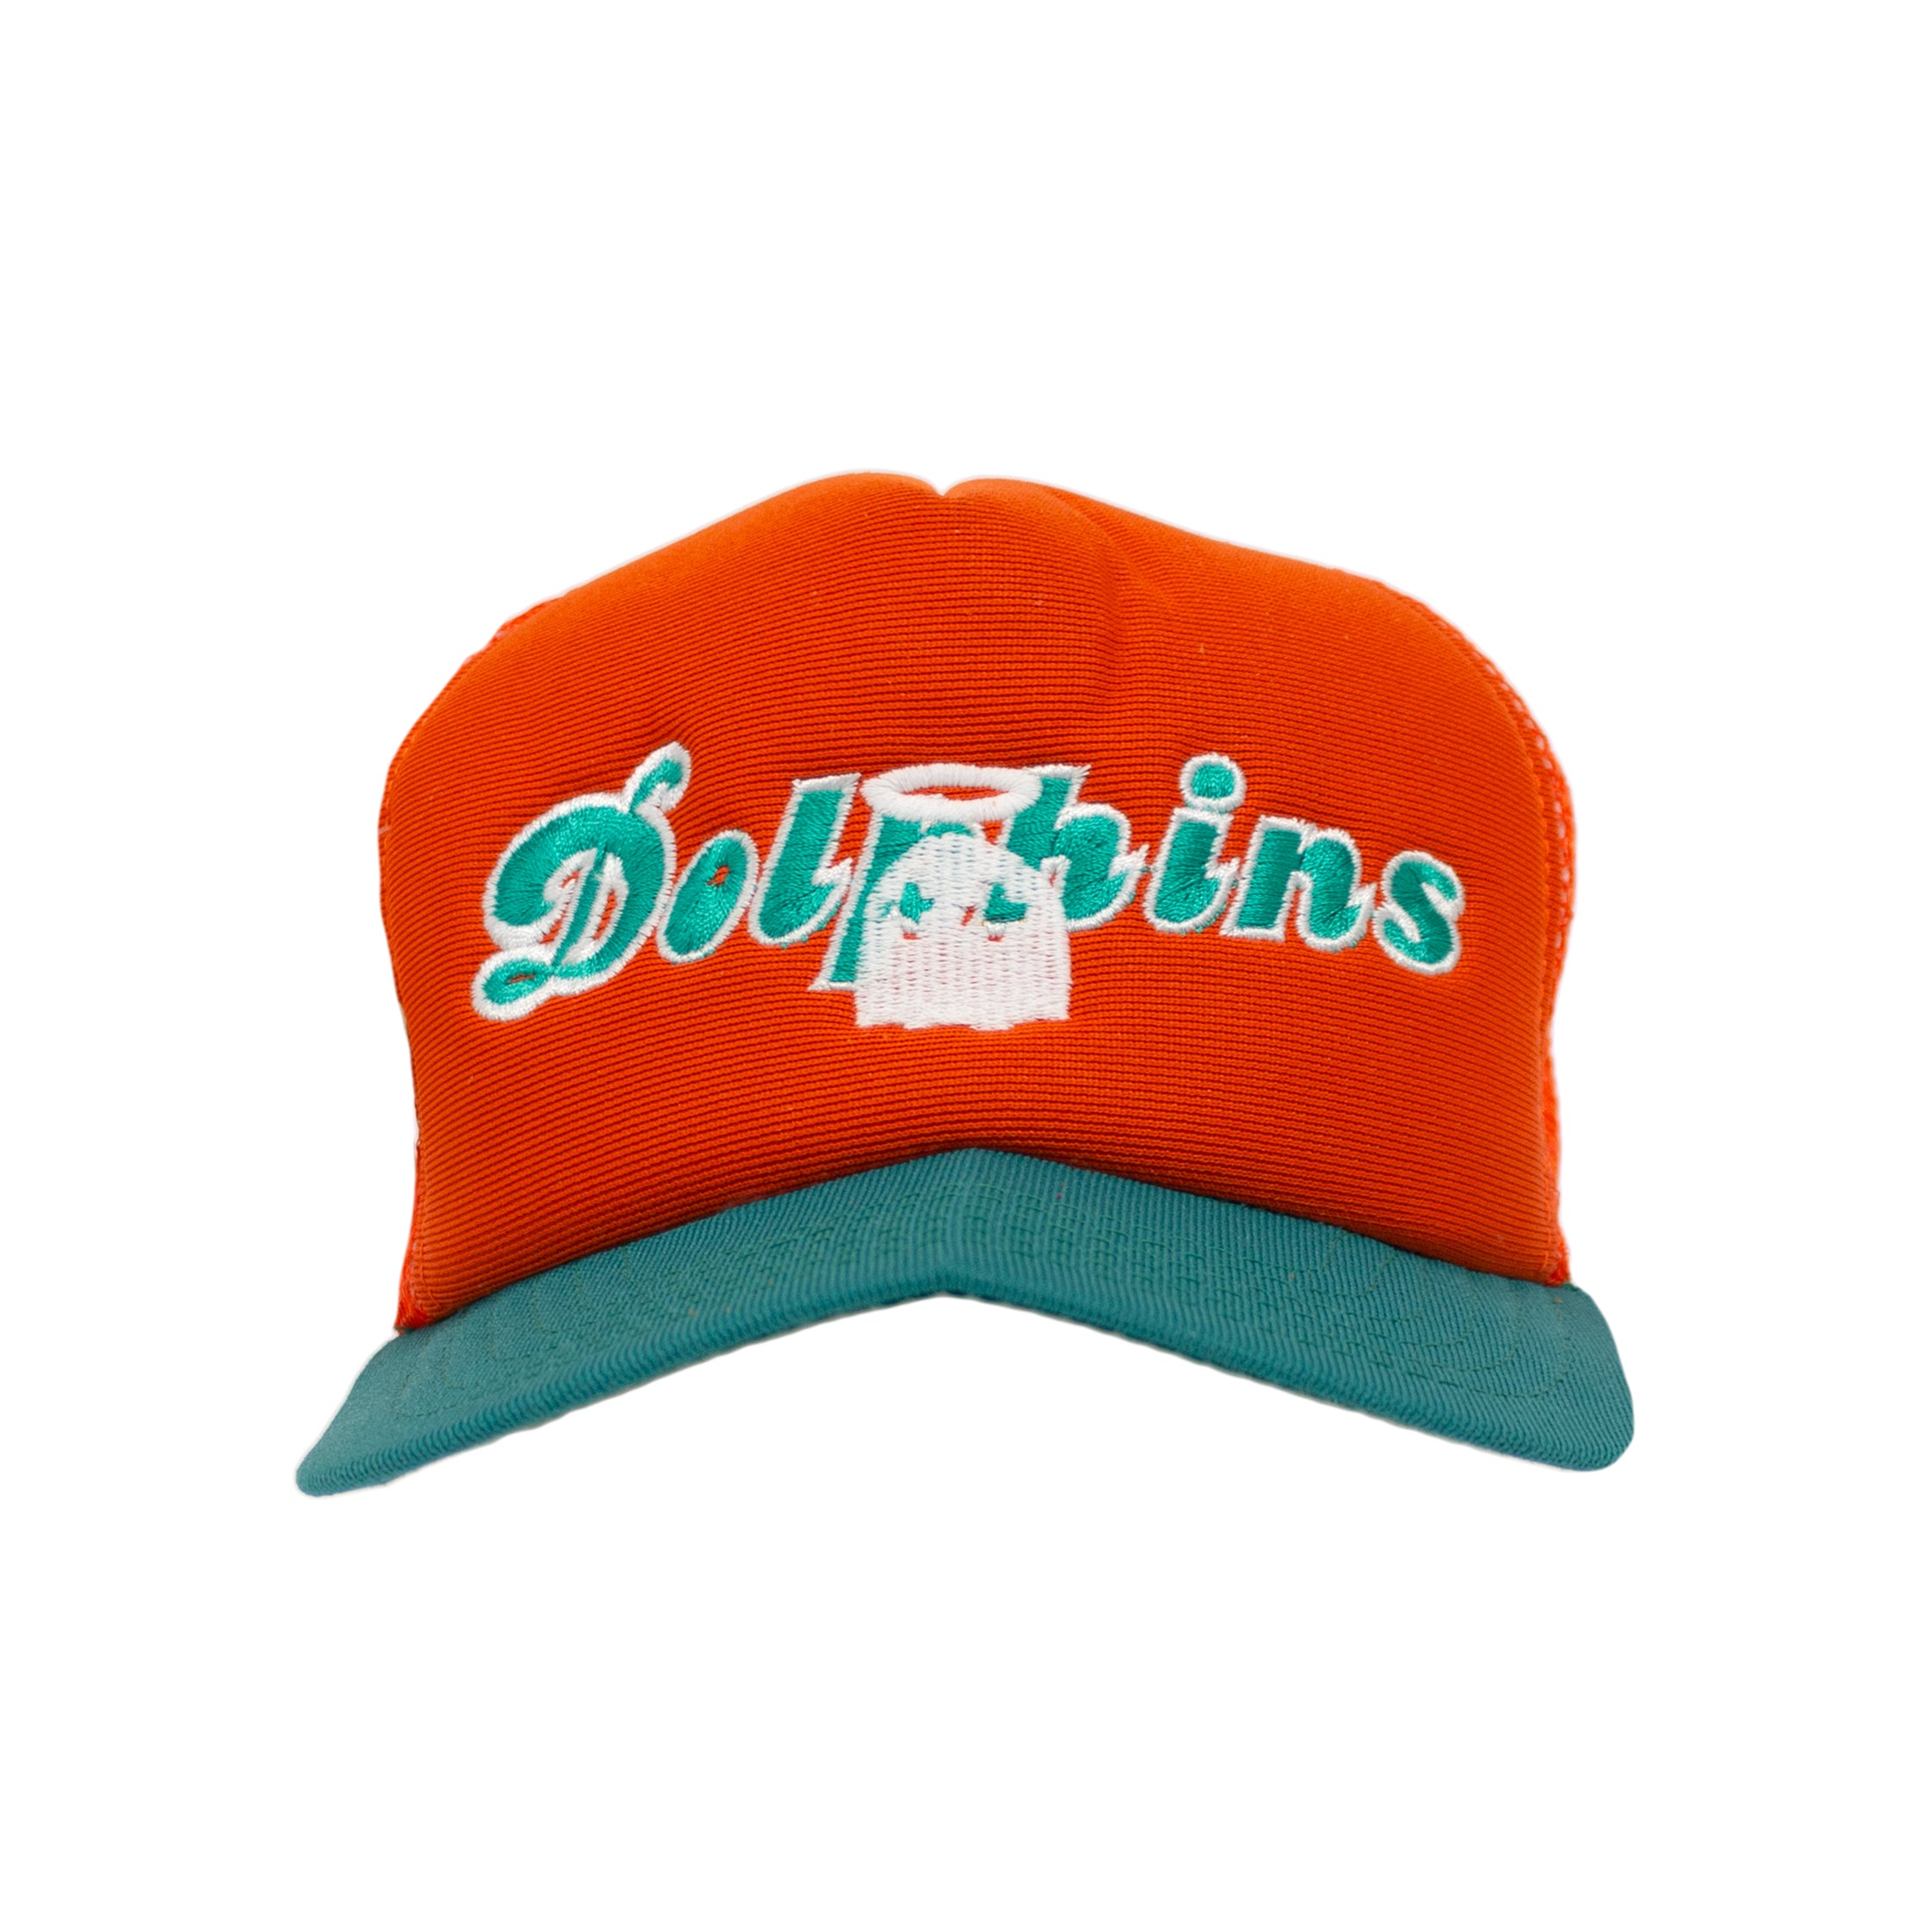 Miami Dolphins 1 of 1 glow ghost snapback